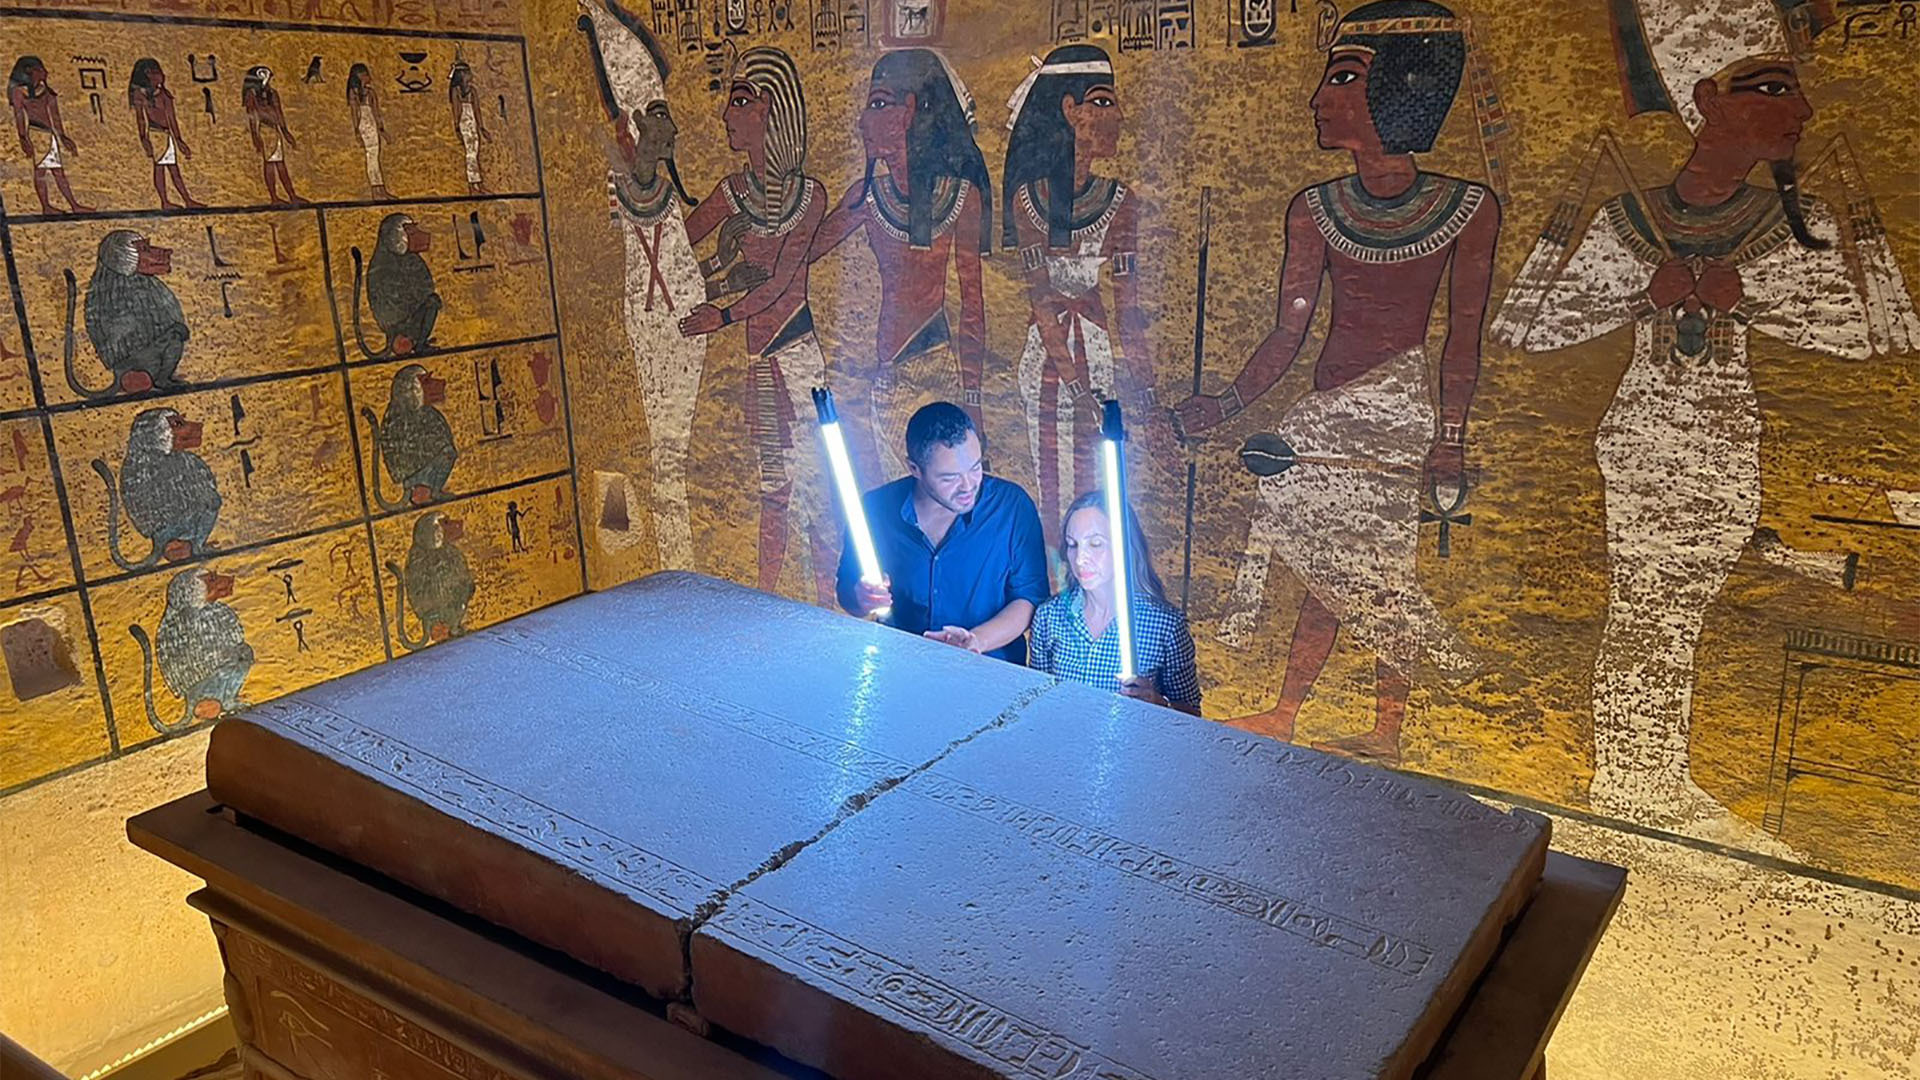 Dr. Yasmin El Shazly and Mahmoud Rashad in KV62 - The Tomb of Tutankhamun in the Valley of the Kings.